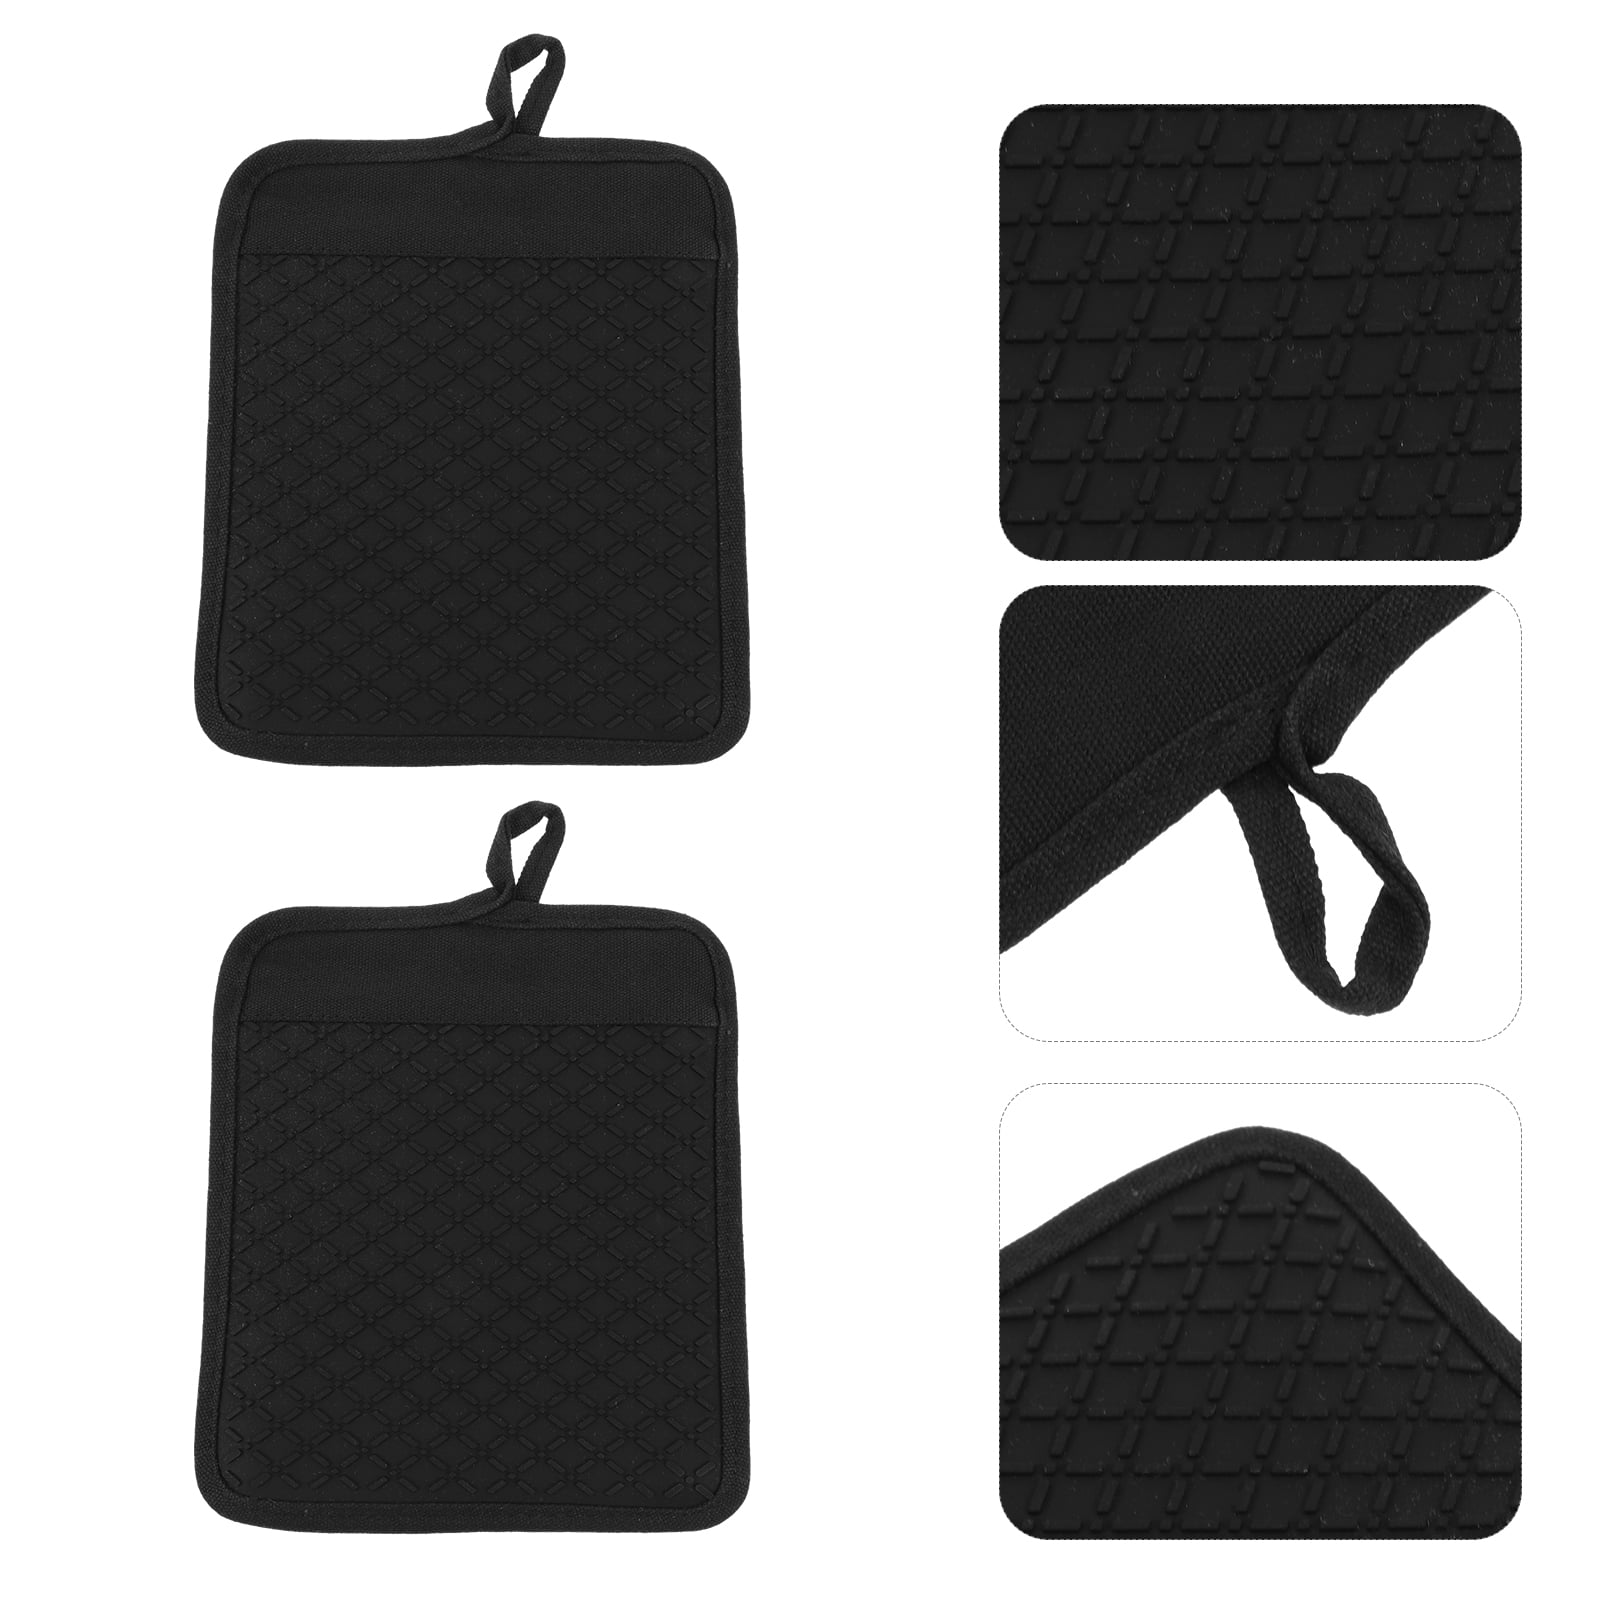 2Pcs Pot Holders Reusable Soft Polyester Kitchen Hot Pads with 2